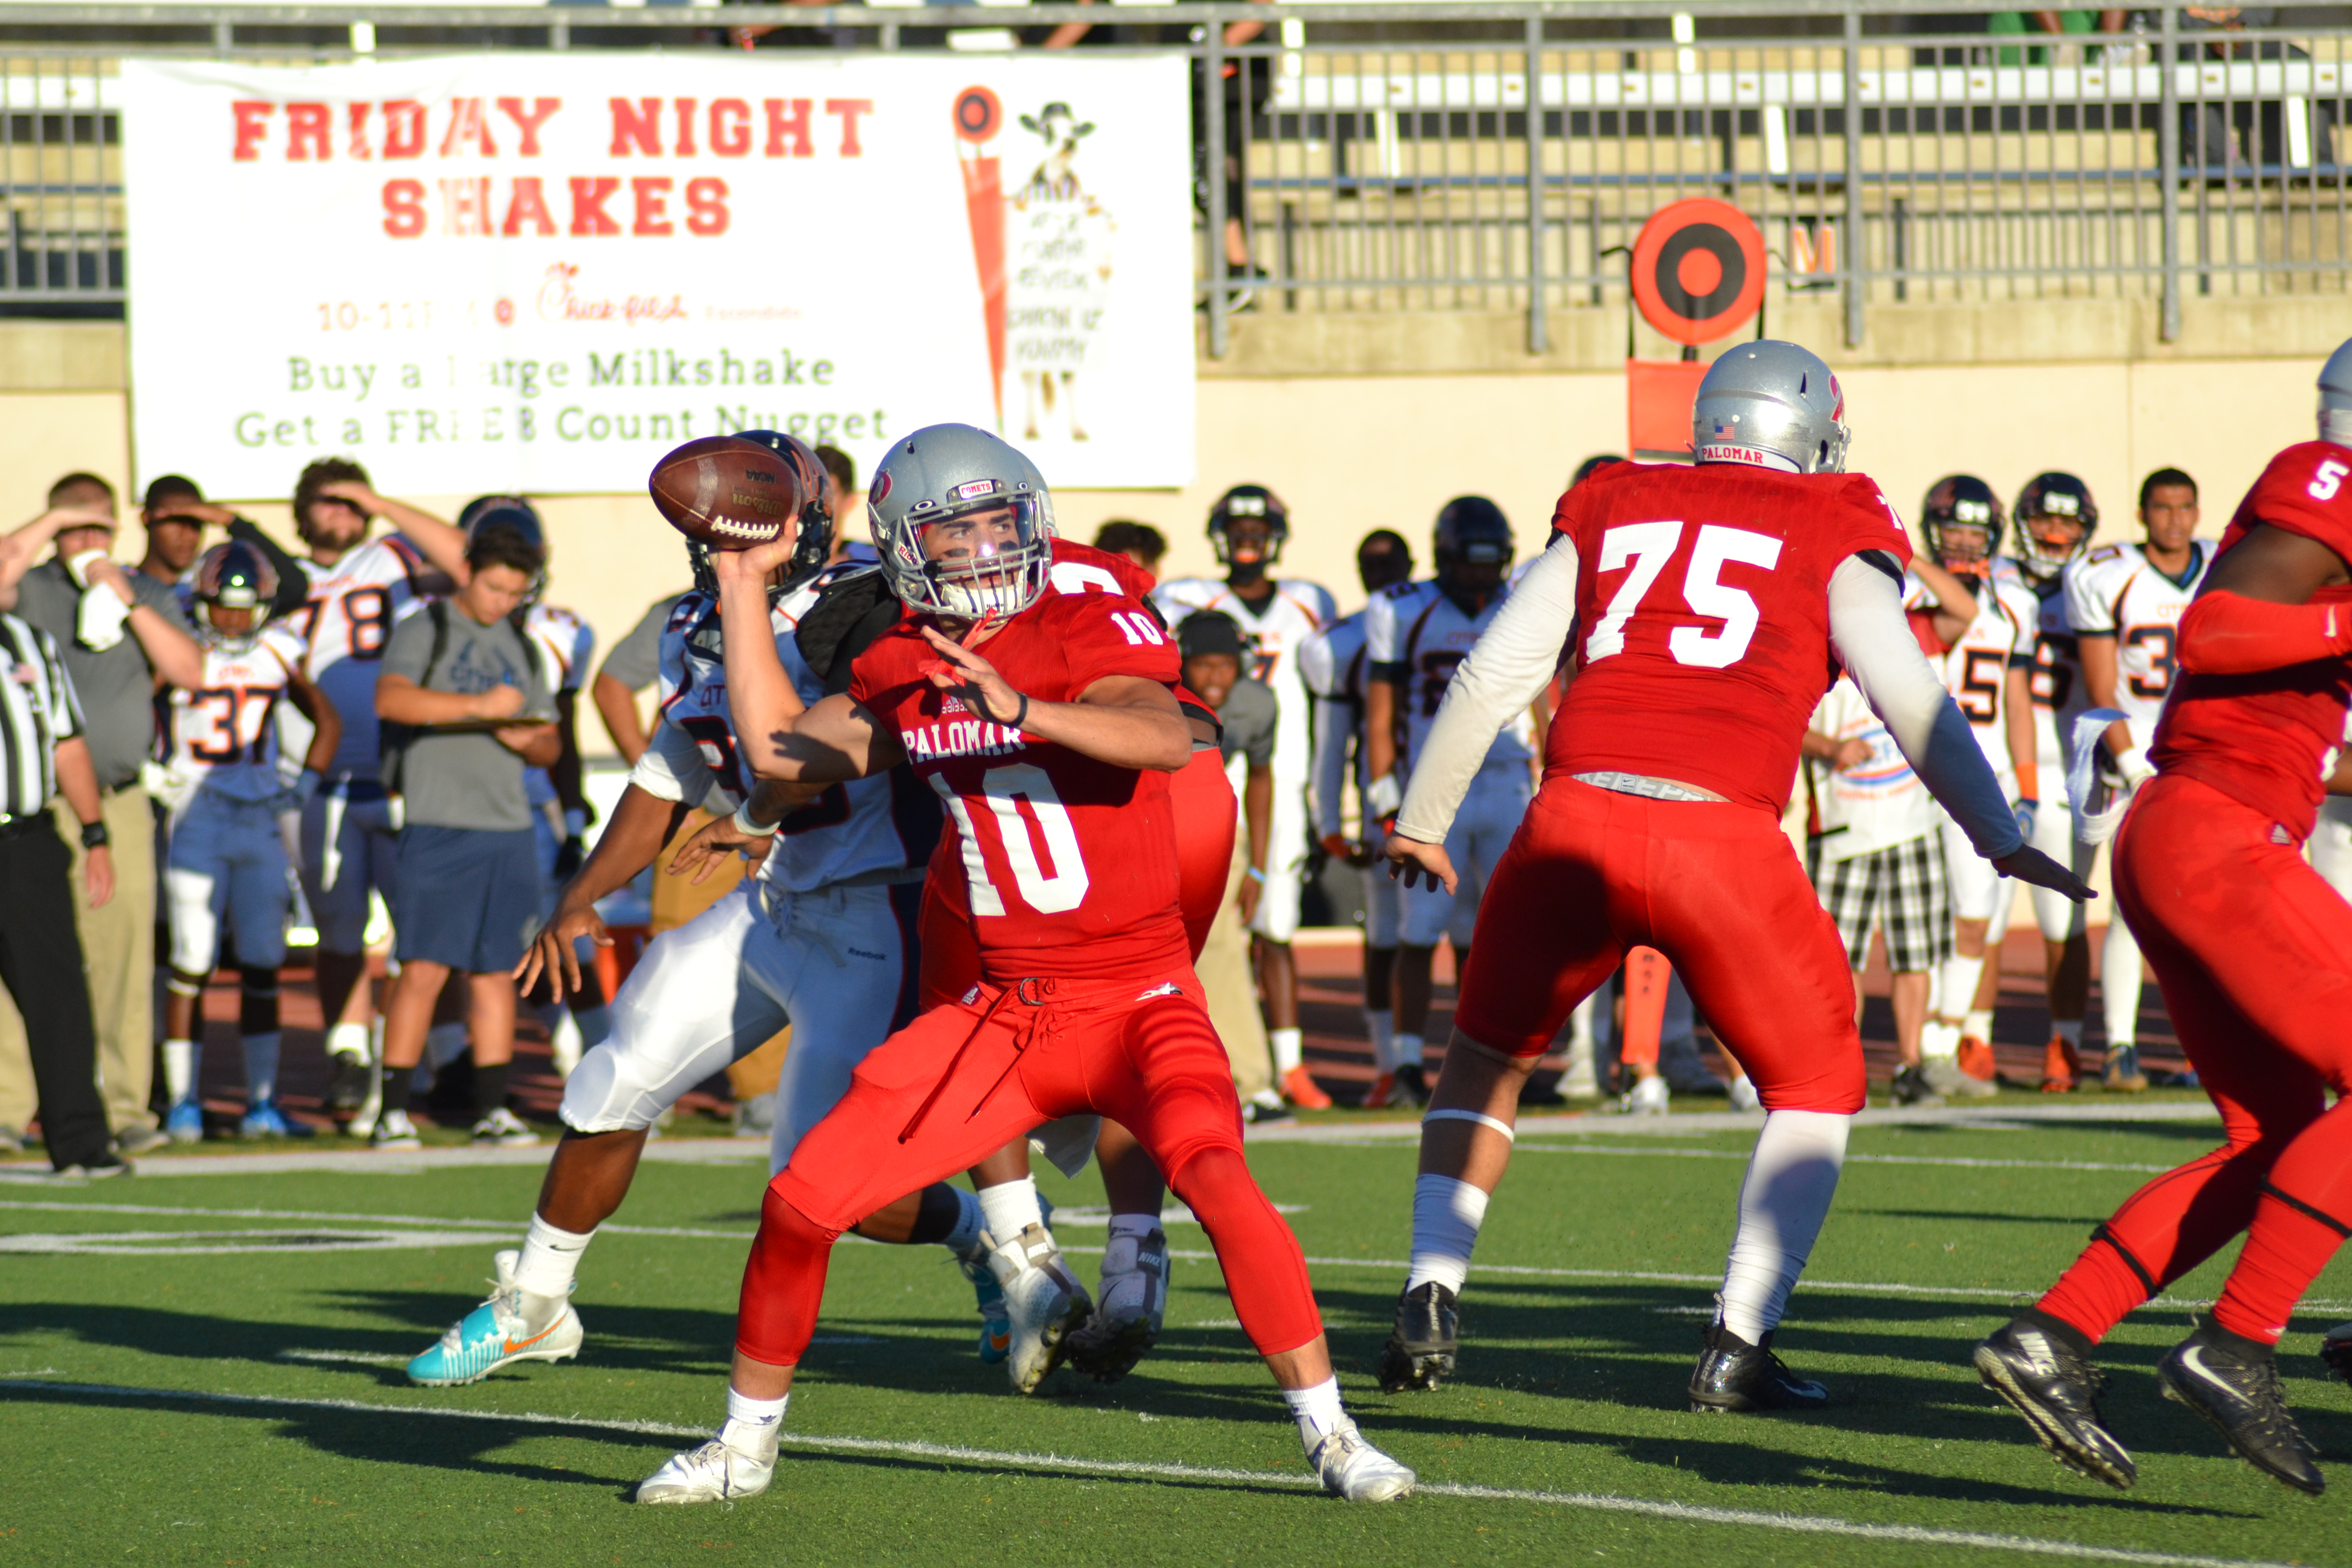 Quarterback Connor Curry throwing a pass during Palomar's 14-10 win over Citrus College. (Krista Moore/The Telescope)